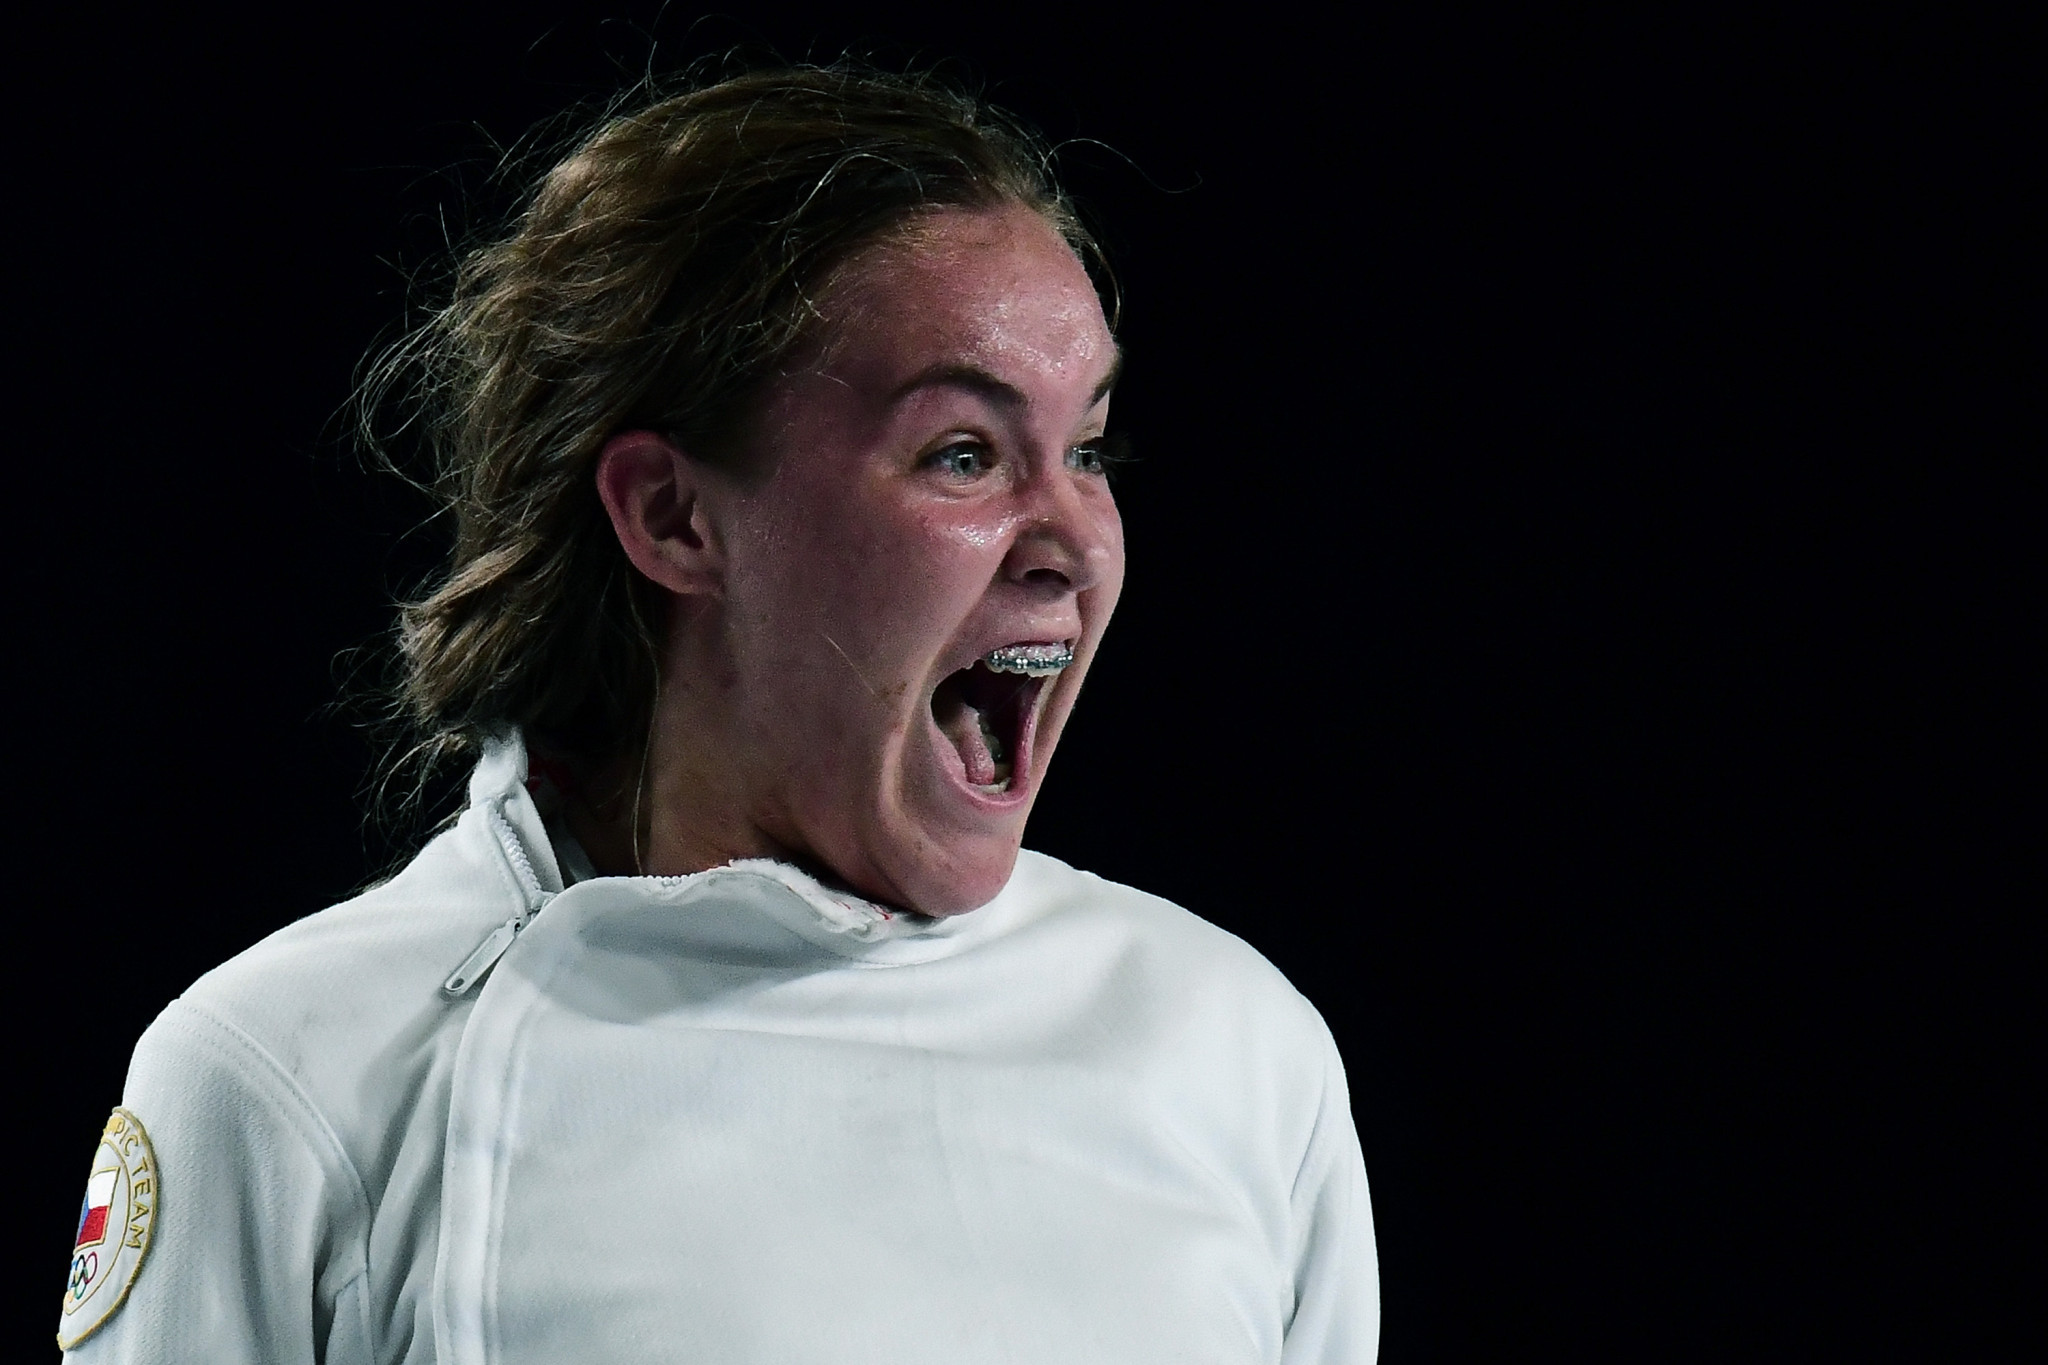 Emotions ran high in the epee fencing competitions ©Getty Images